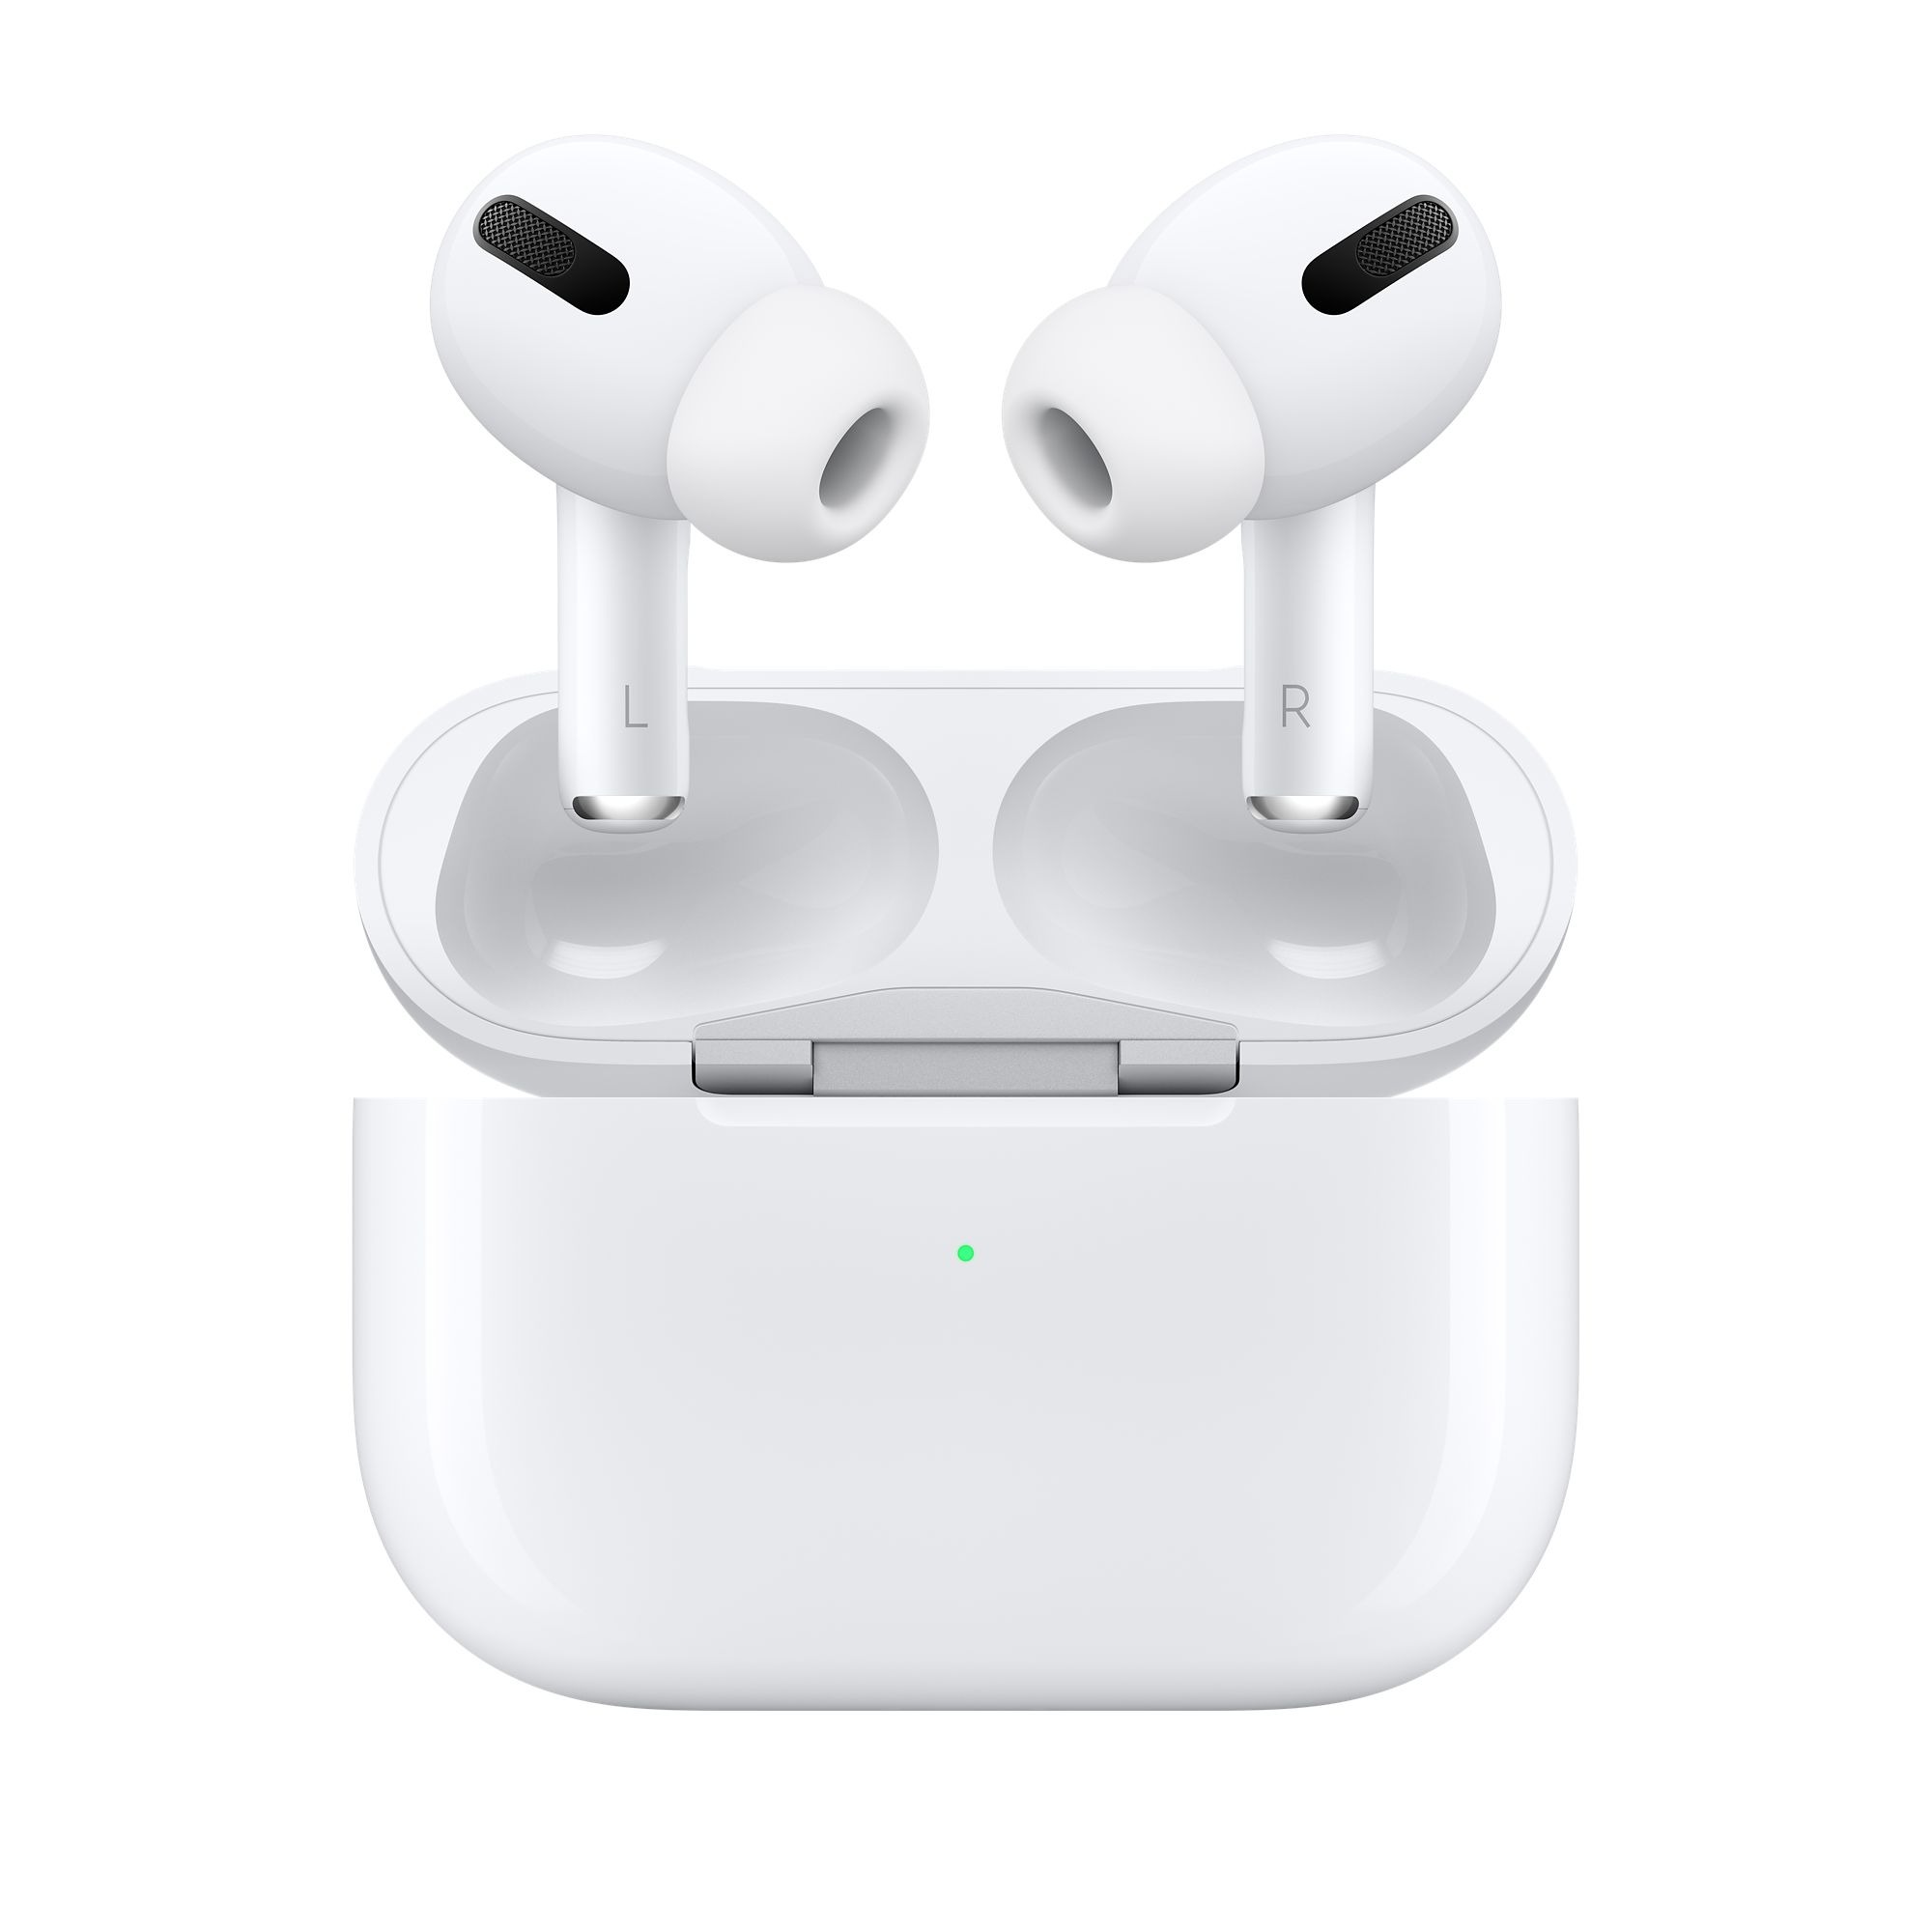 Apple AirPods Pro (2nd generation) with USB-C Charging Case